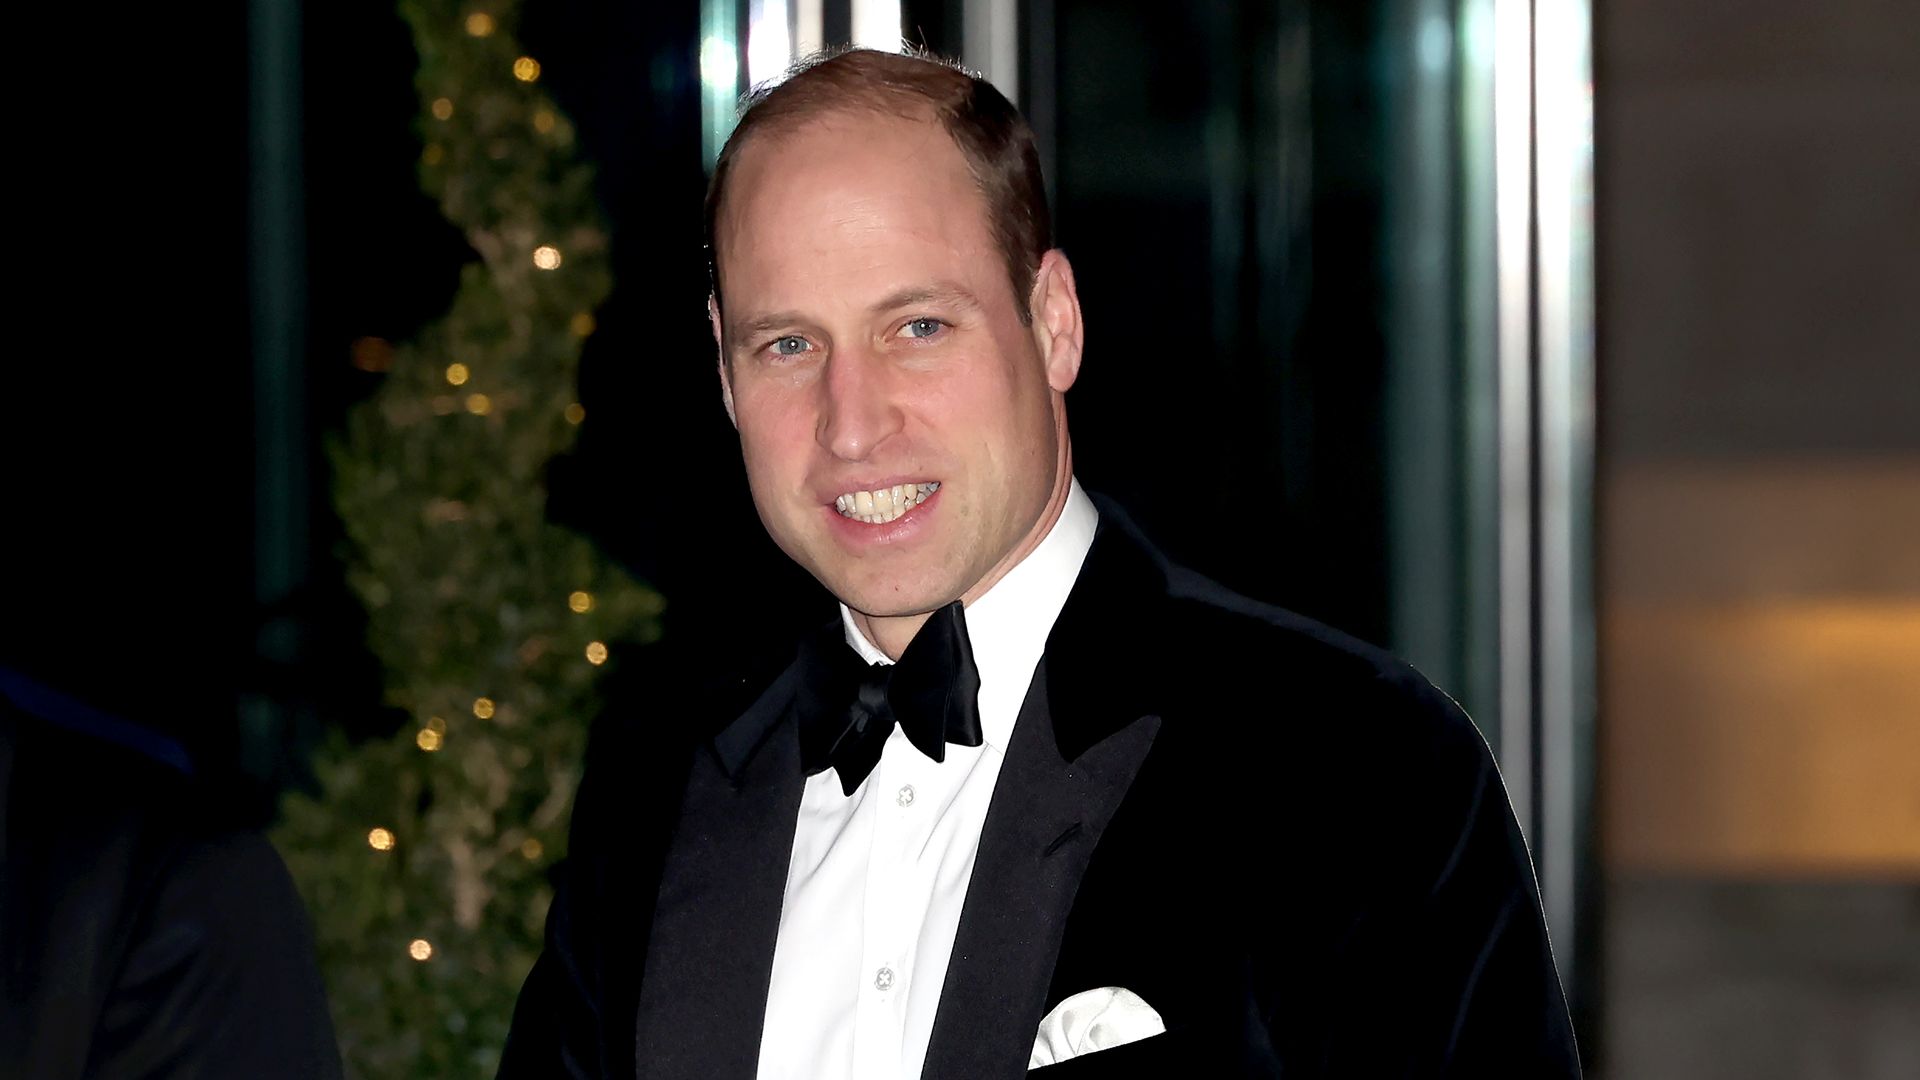 Prince William wearing a tuxedo